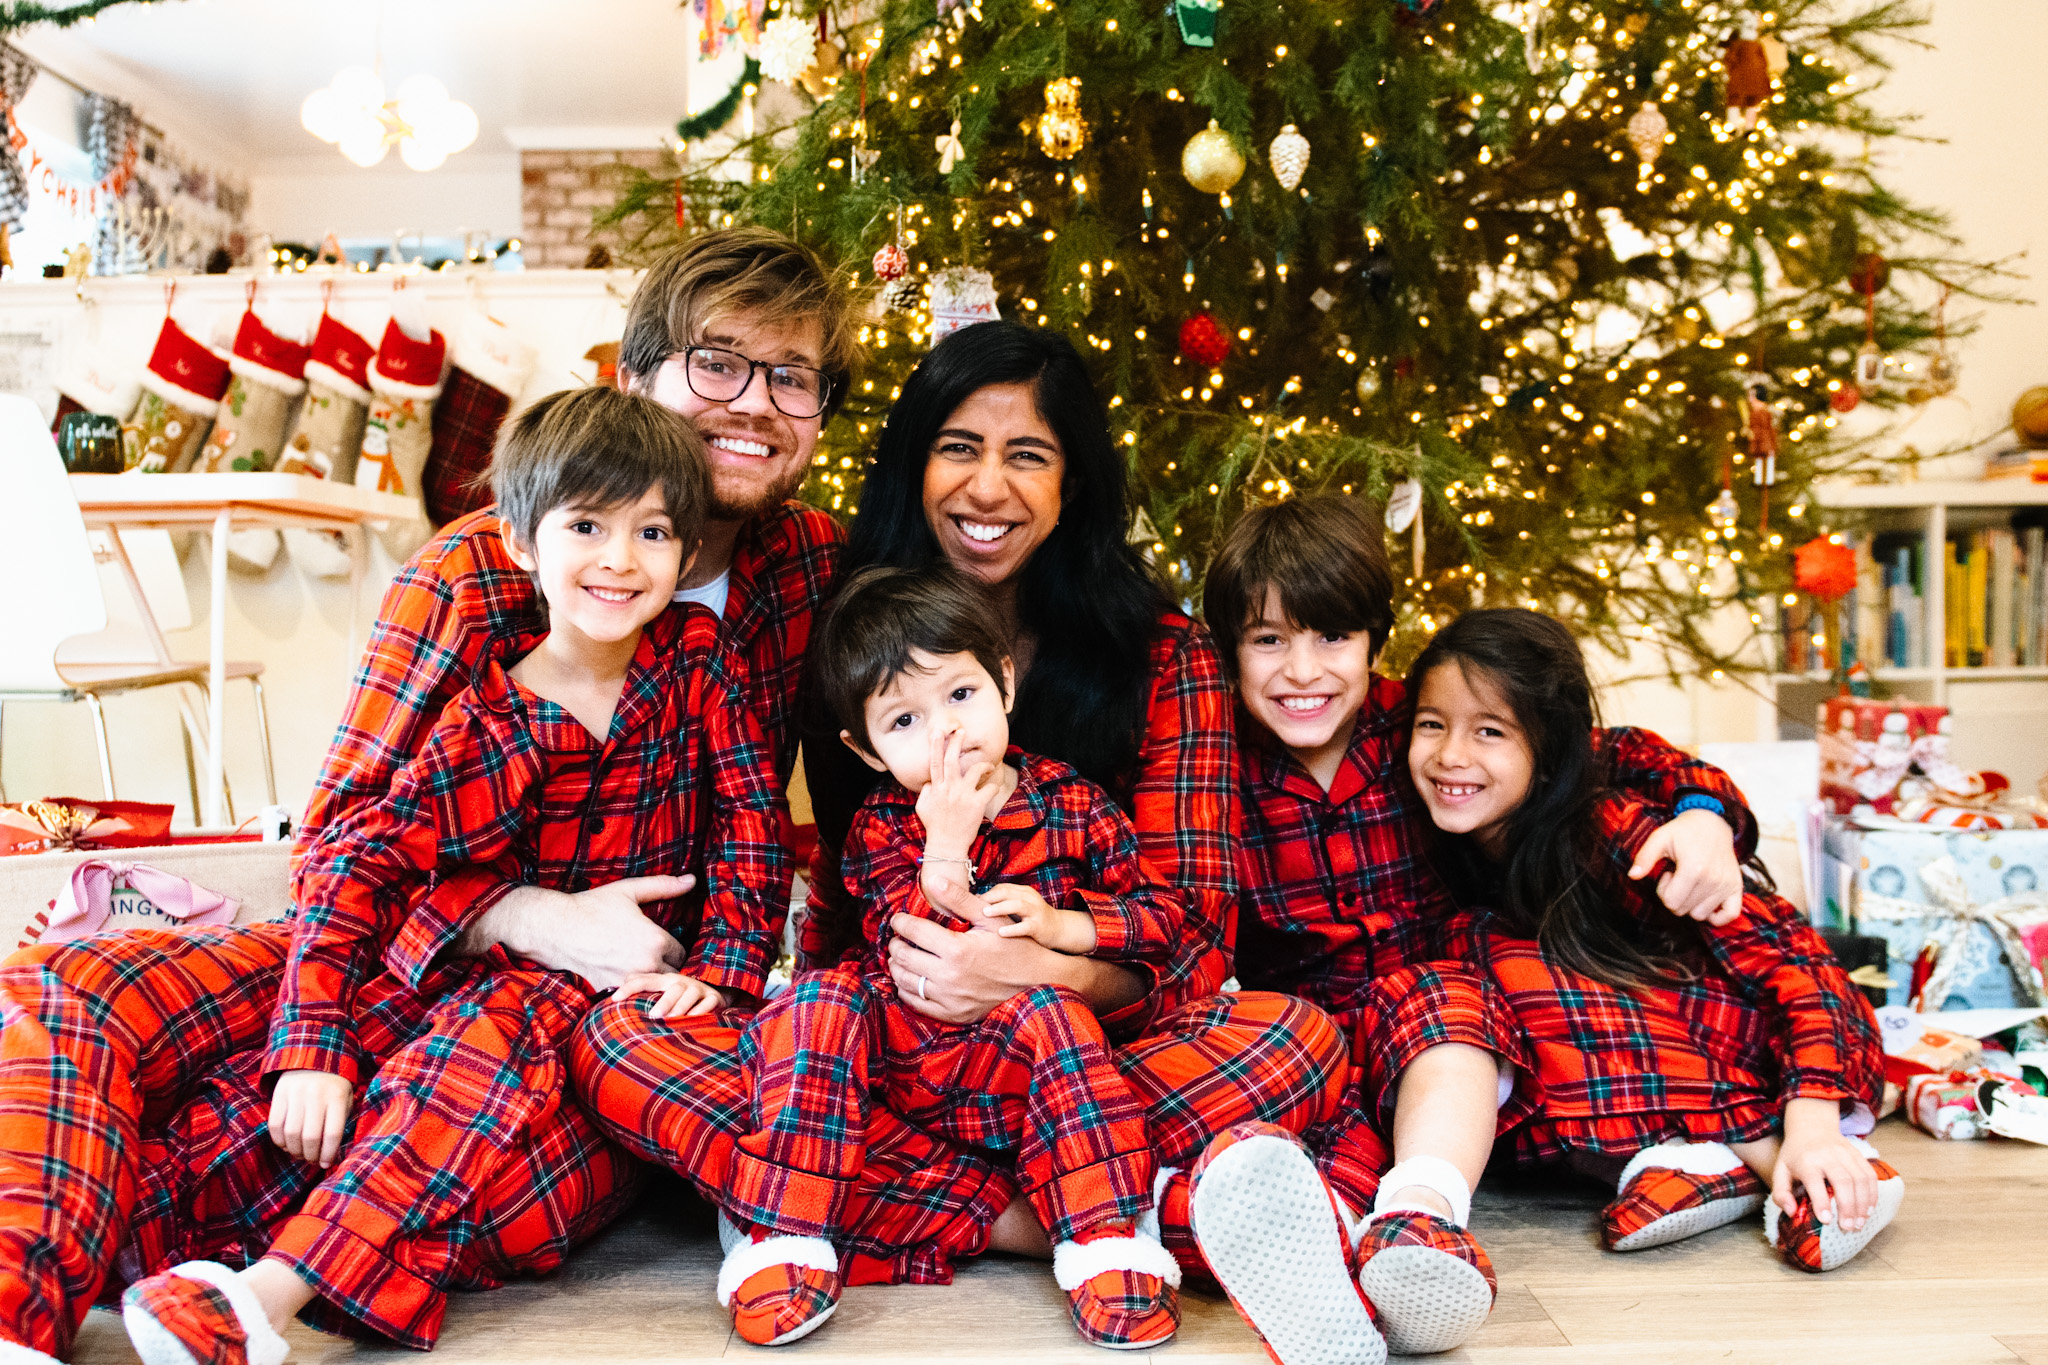 Personalized Matching Family Christmas Pajamas with Names – Cotton